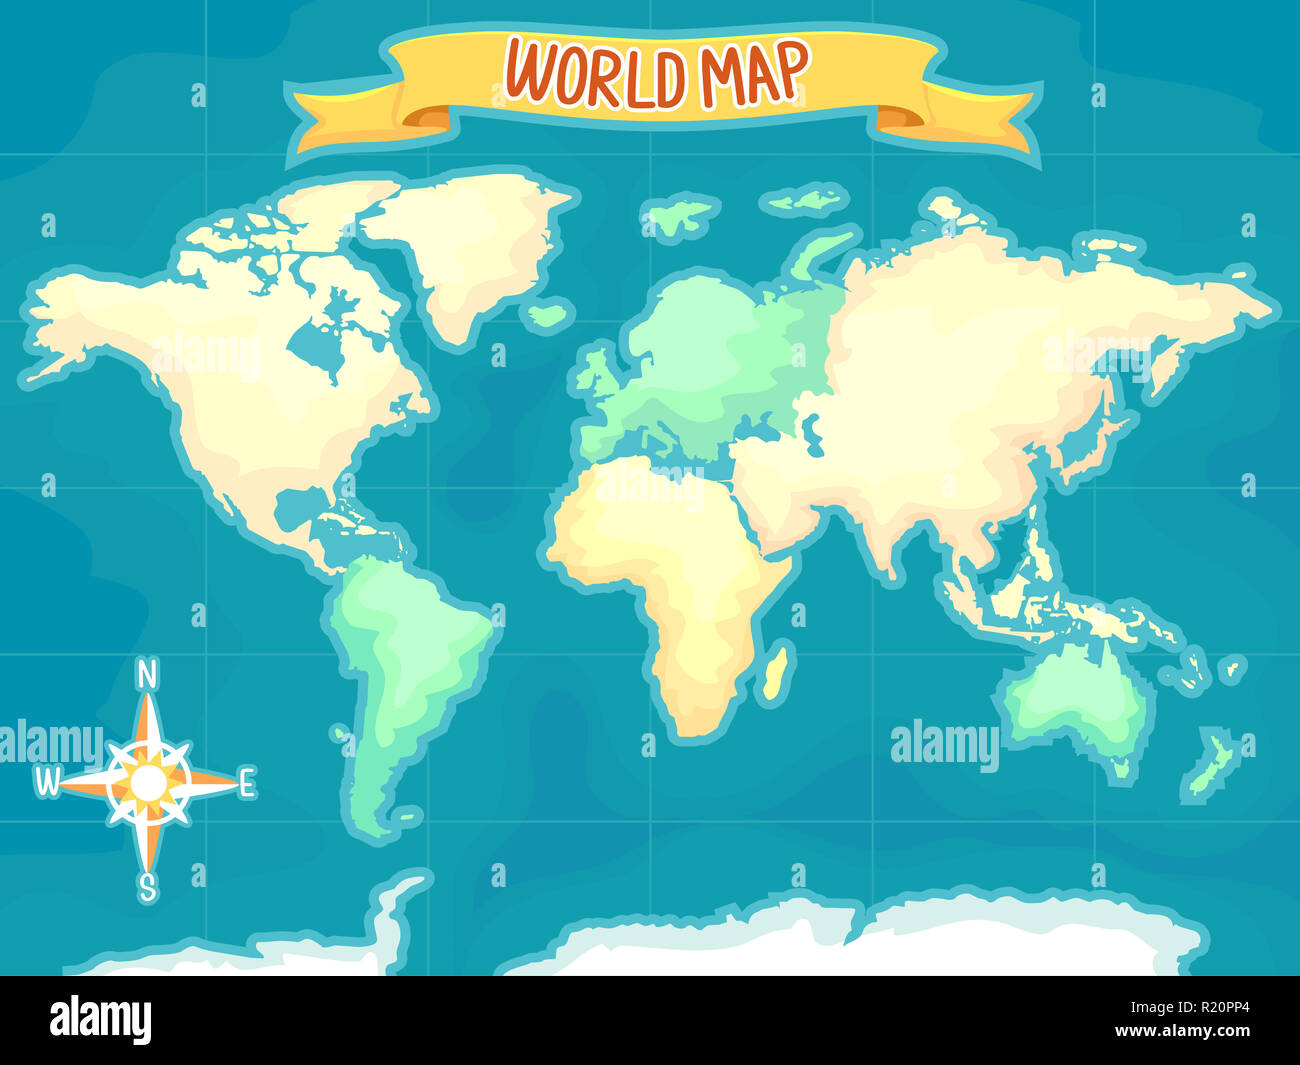 Colorful Illustration Featuring a World Map With a Direction Indicator at the Bottom Stock Photo